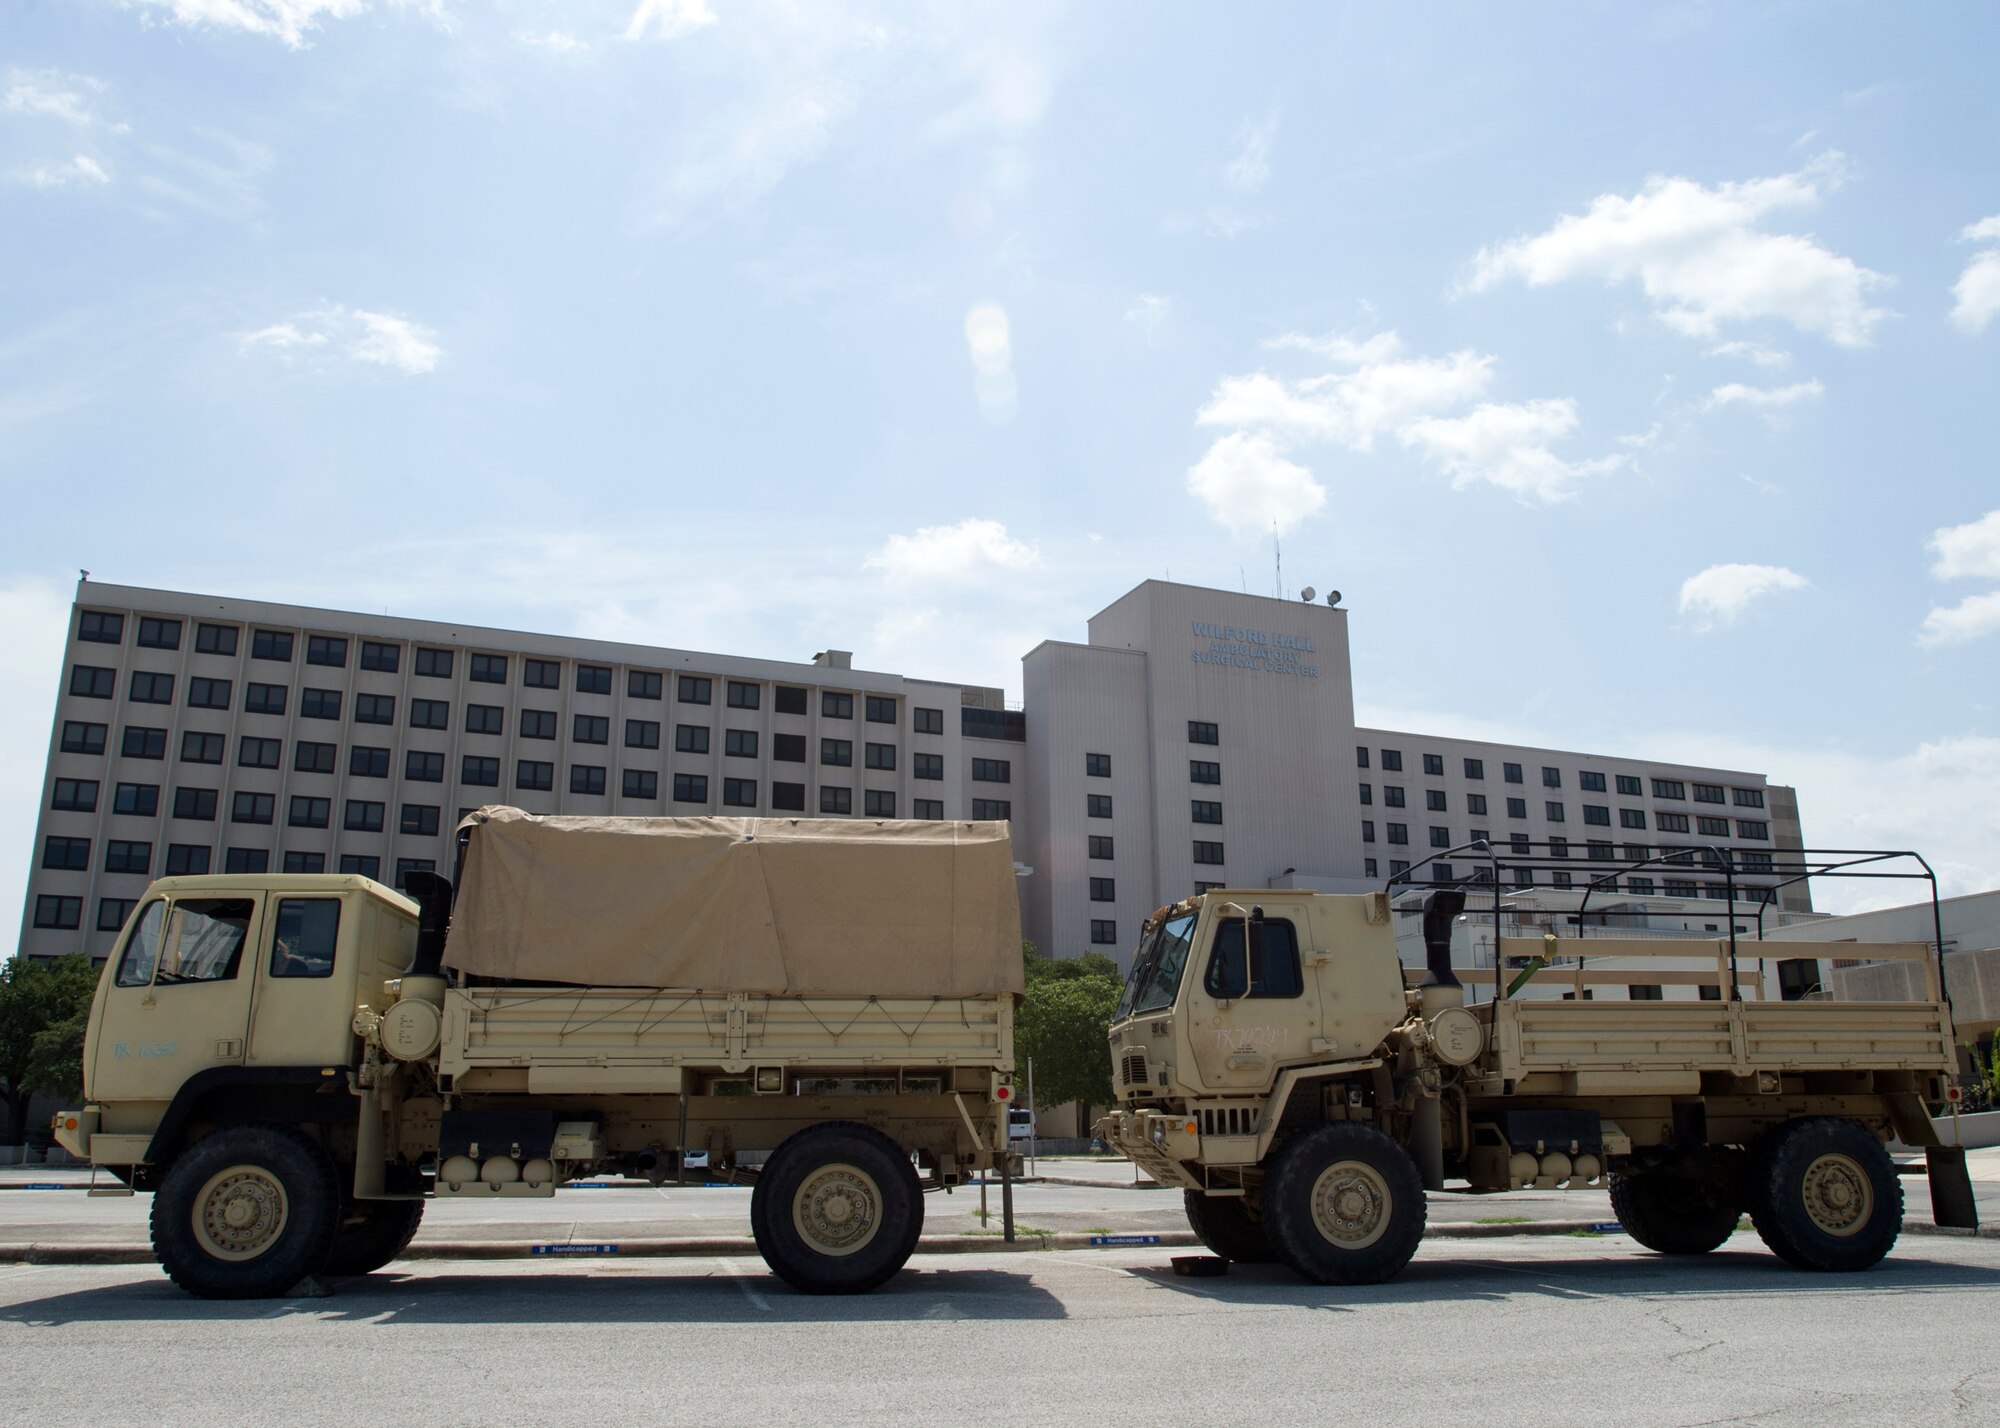 Two light medium tactical vehicle is parked outside of the old Wilford Hall Ambulatory Surgical Center Sept. 2 after dropping off 67 soldiers, on Joint Base San Antonio-Lackland, Texas. More than 500 soldiers are awaiting future deployment instructions at the old Wilford Hall in response to the devastation caused by Hurricane Harvey. (U.S. Air Force photo/Staff Sgt. Kevin Iinuma)